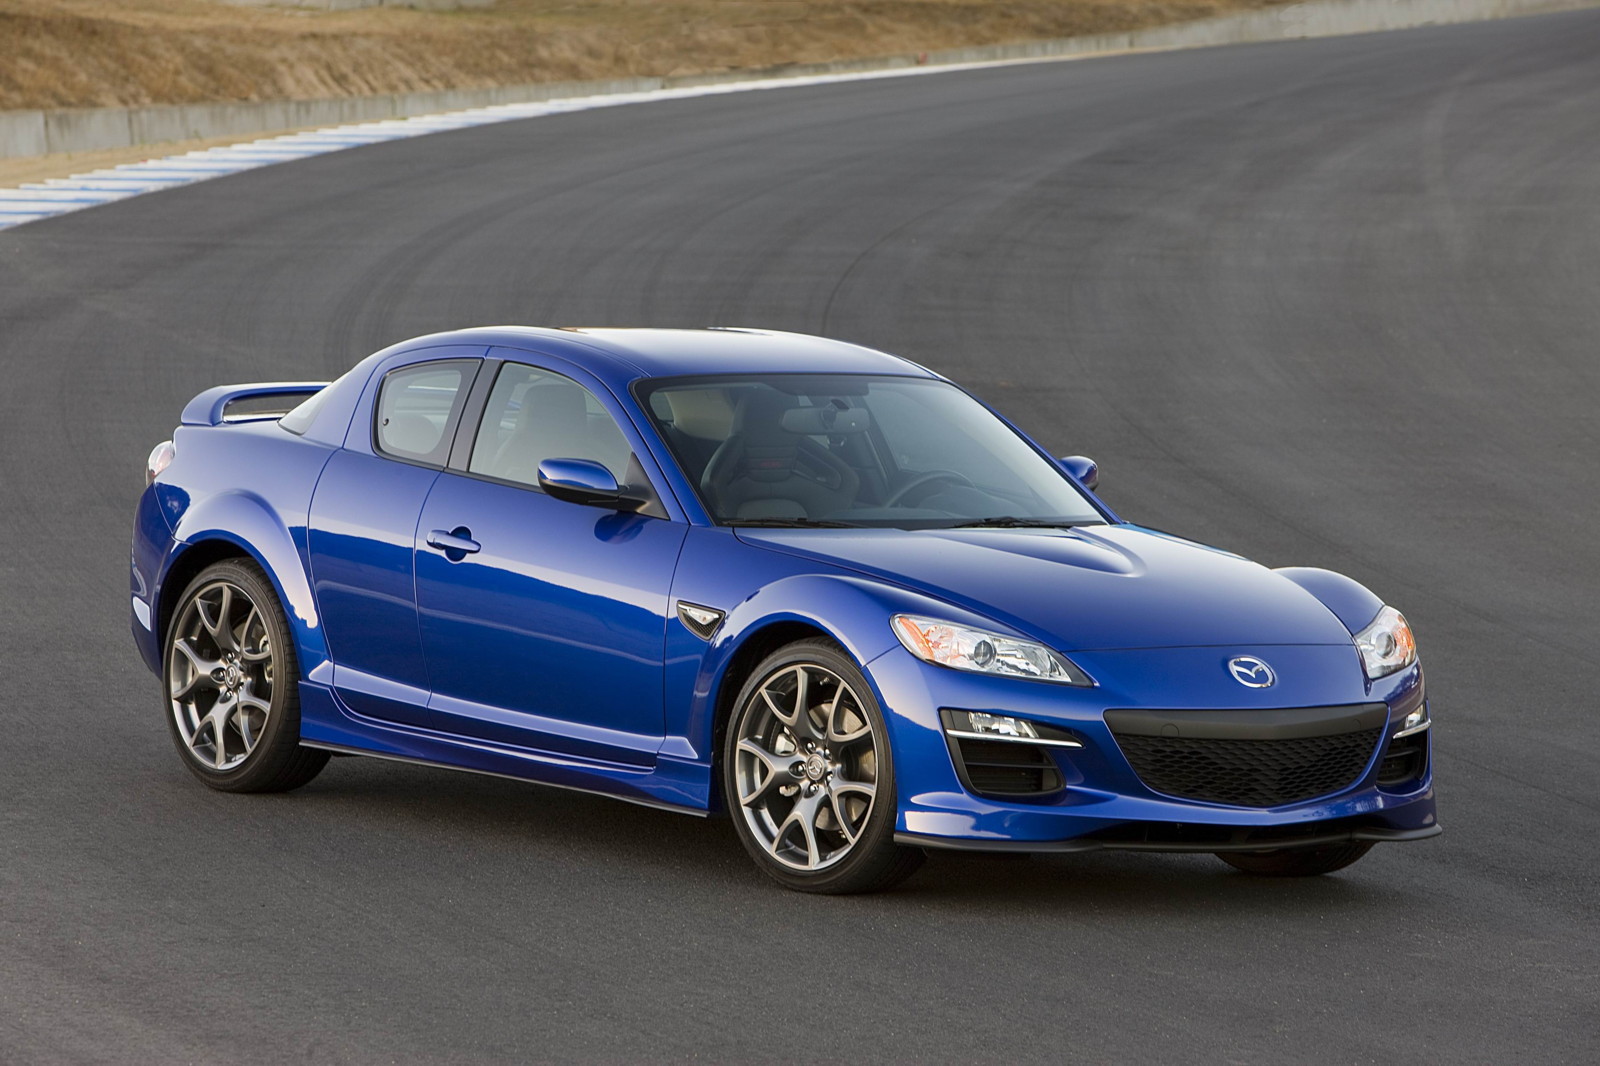 New And Used Mazda Rx 8 Prices Photos Reviews Specs The Car Connection